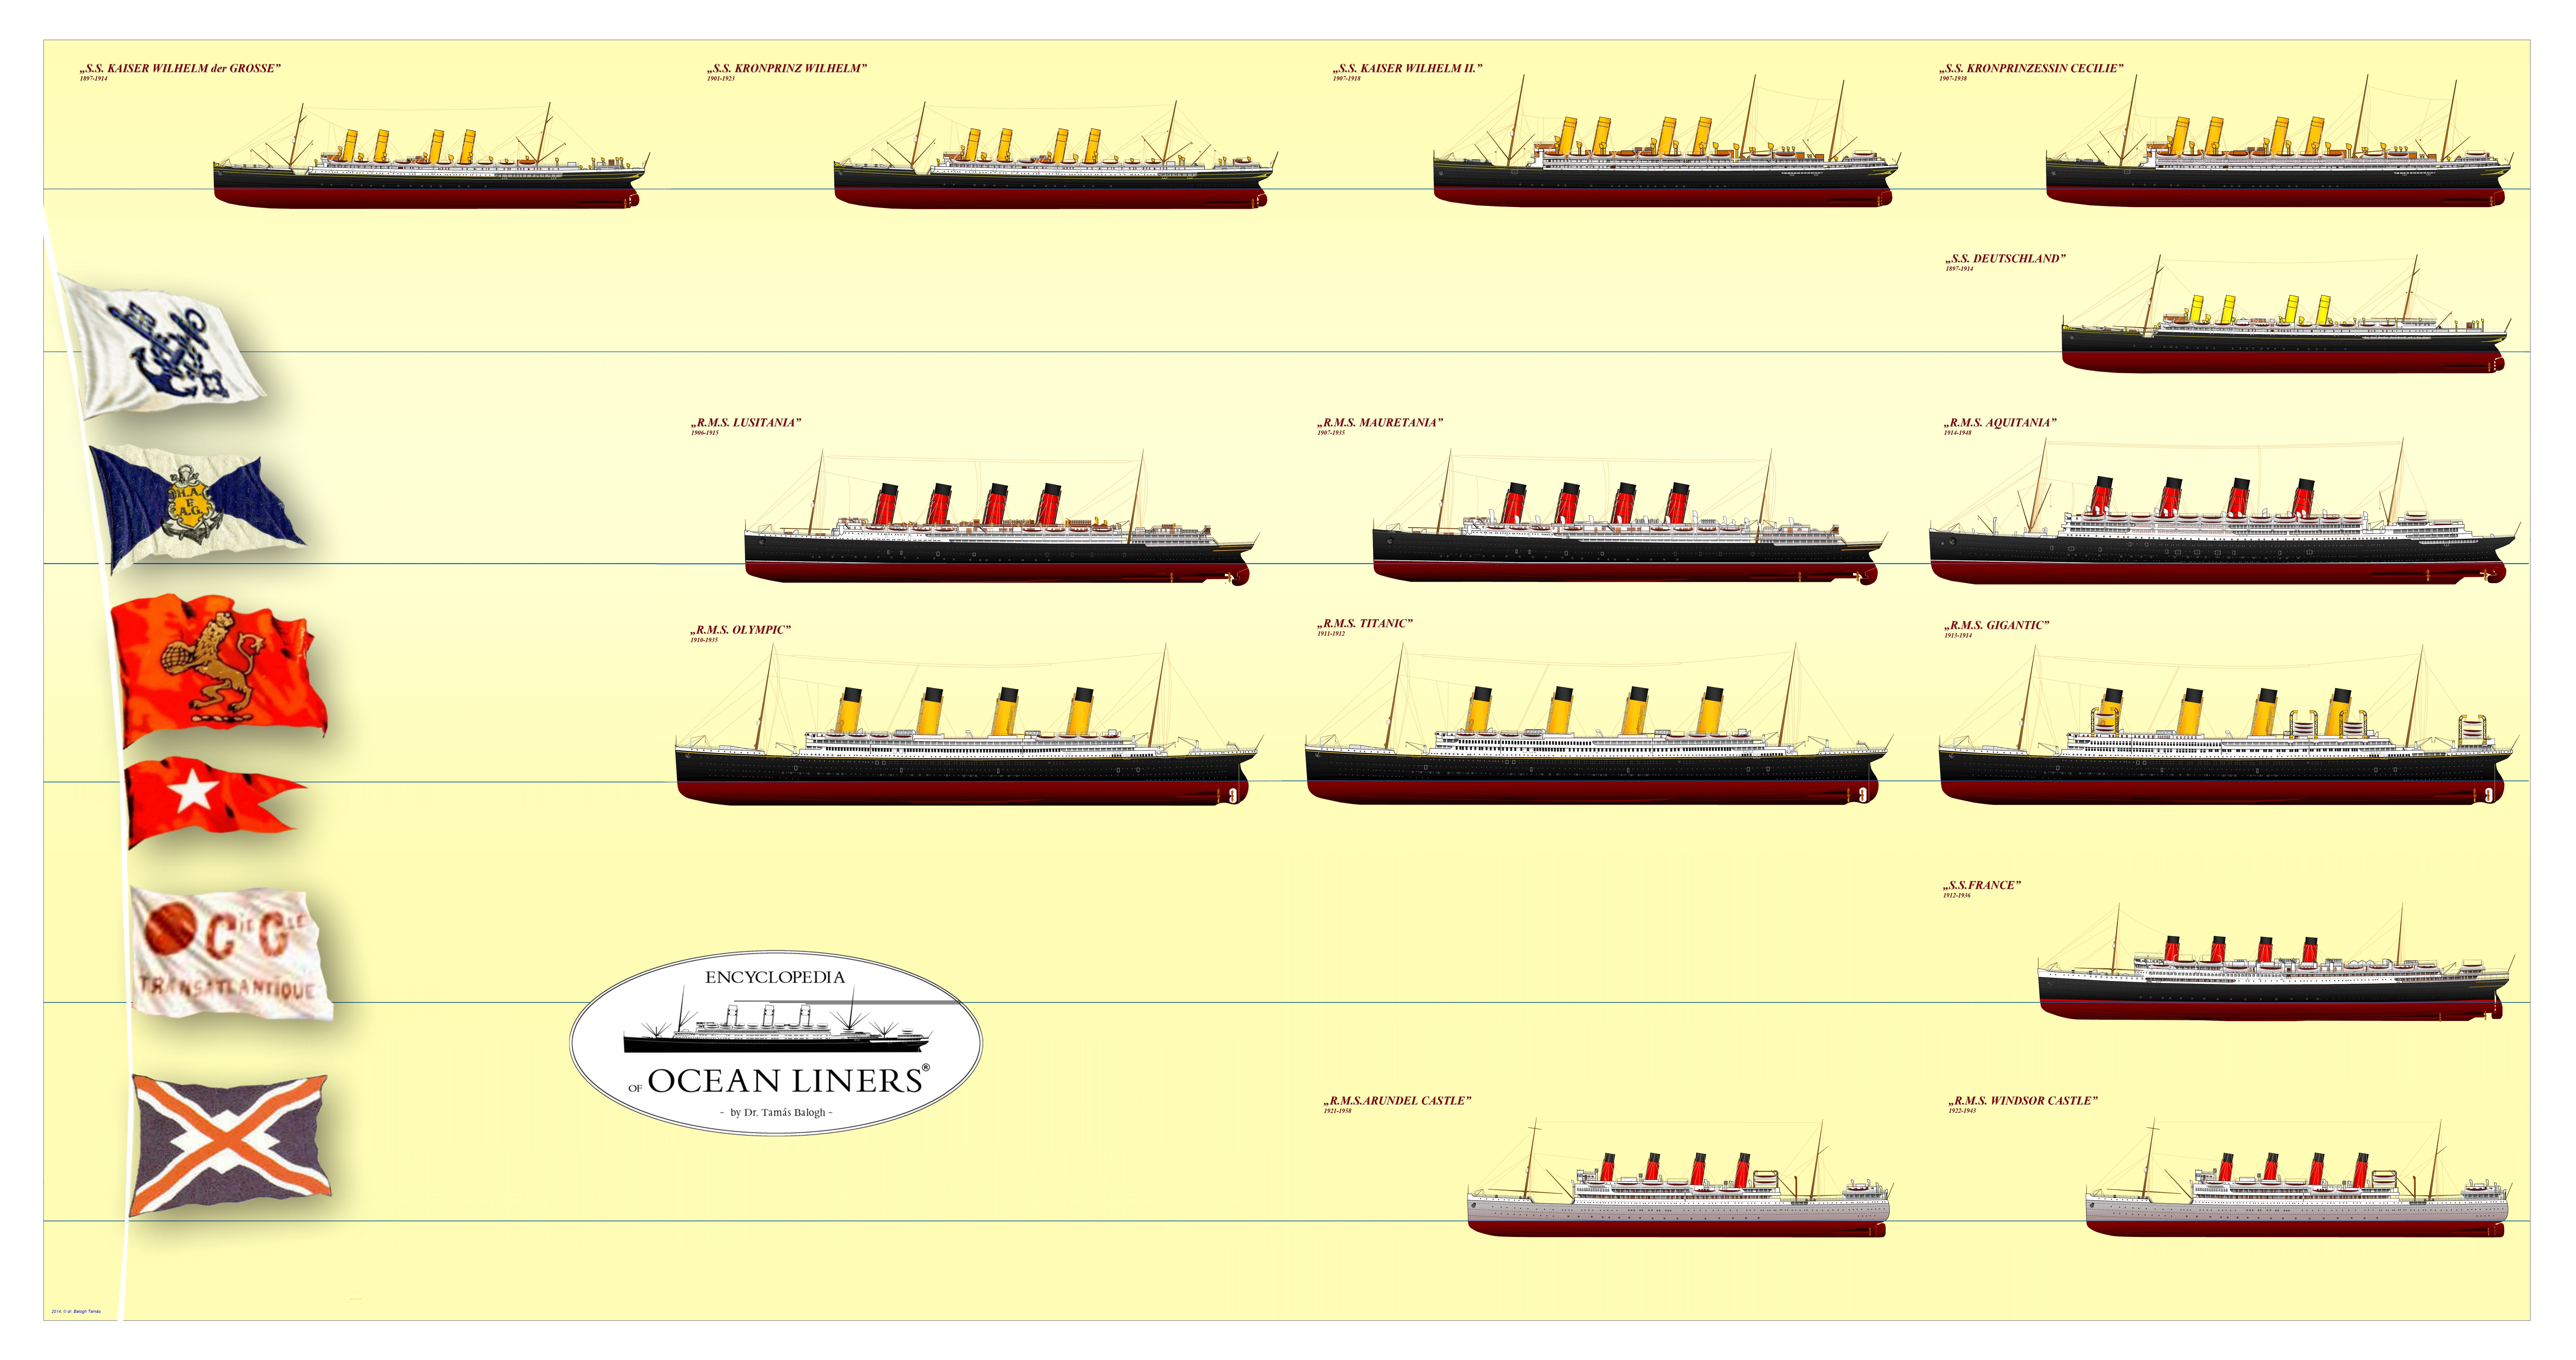 Olympic Class Liners, History Wiki